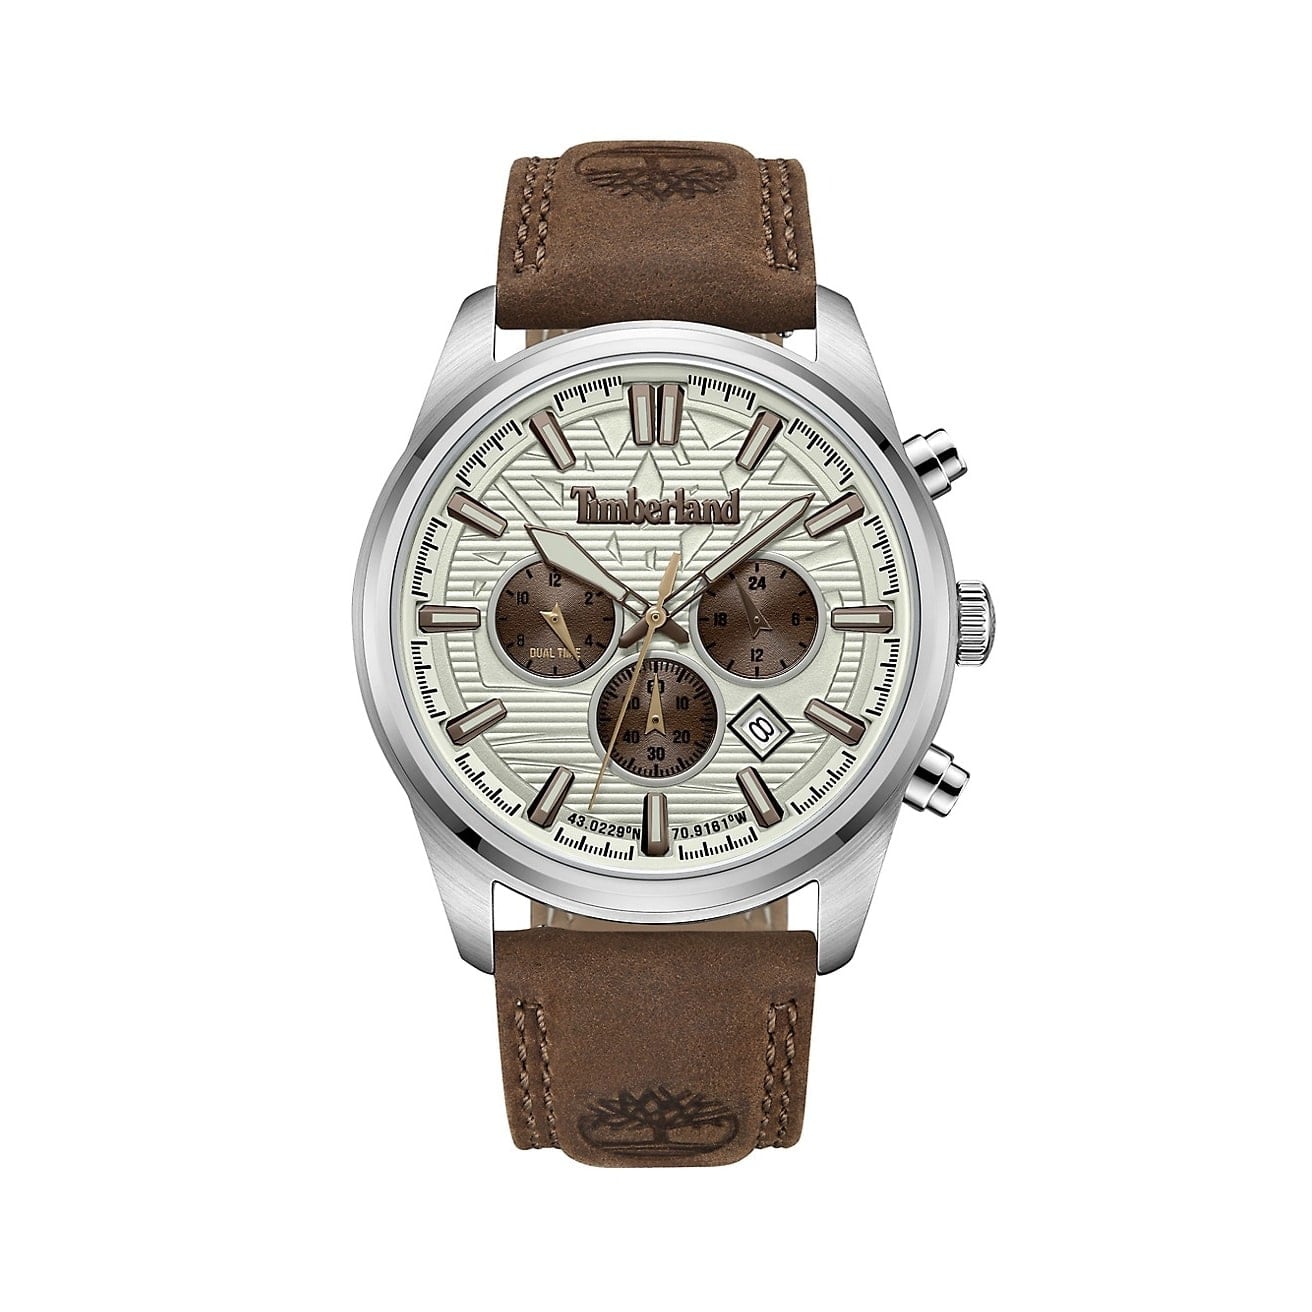 A Timberland Northbridge Stainless Steel & Leather Strap Chronograph Watch with brown leather straps.